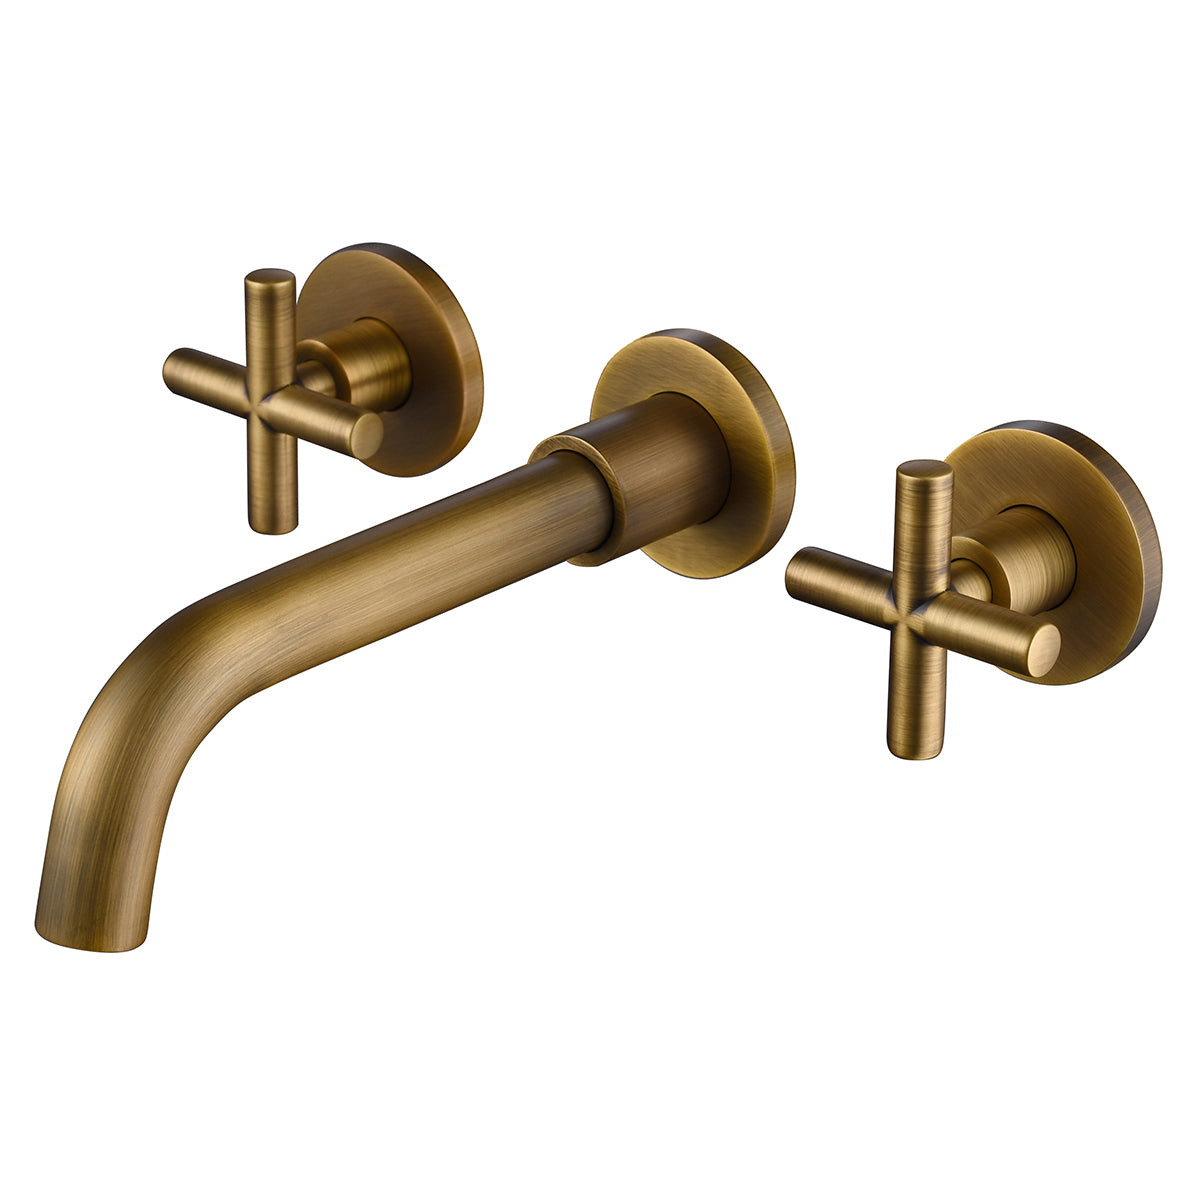 Double Handle Wall Mounted Faucet with Valve in Antique Bronze-Boyel Living